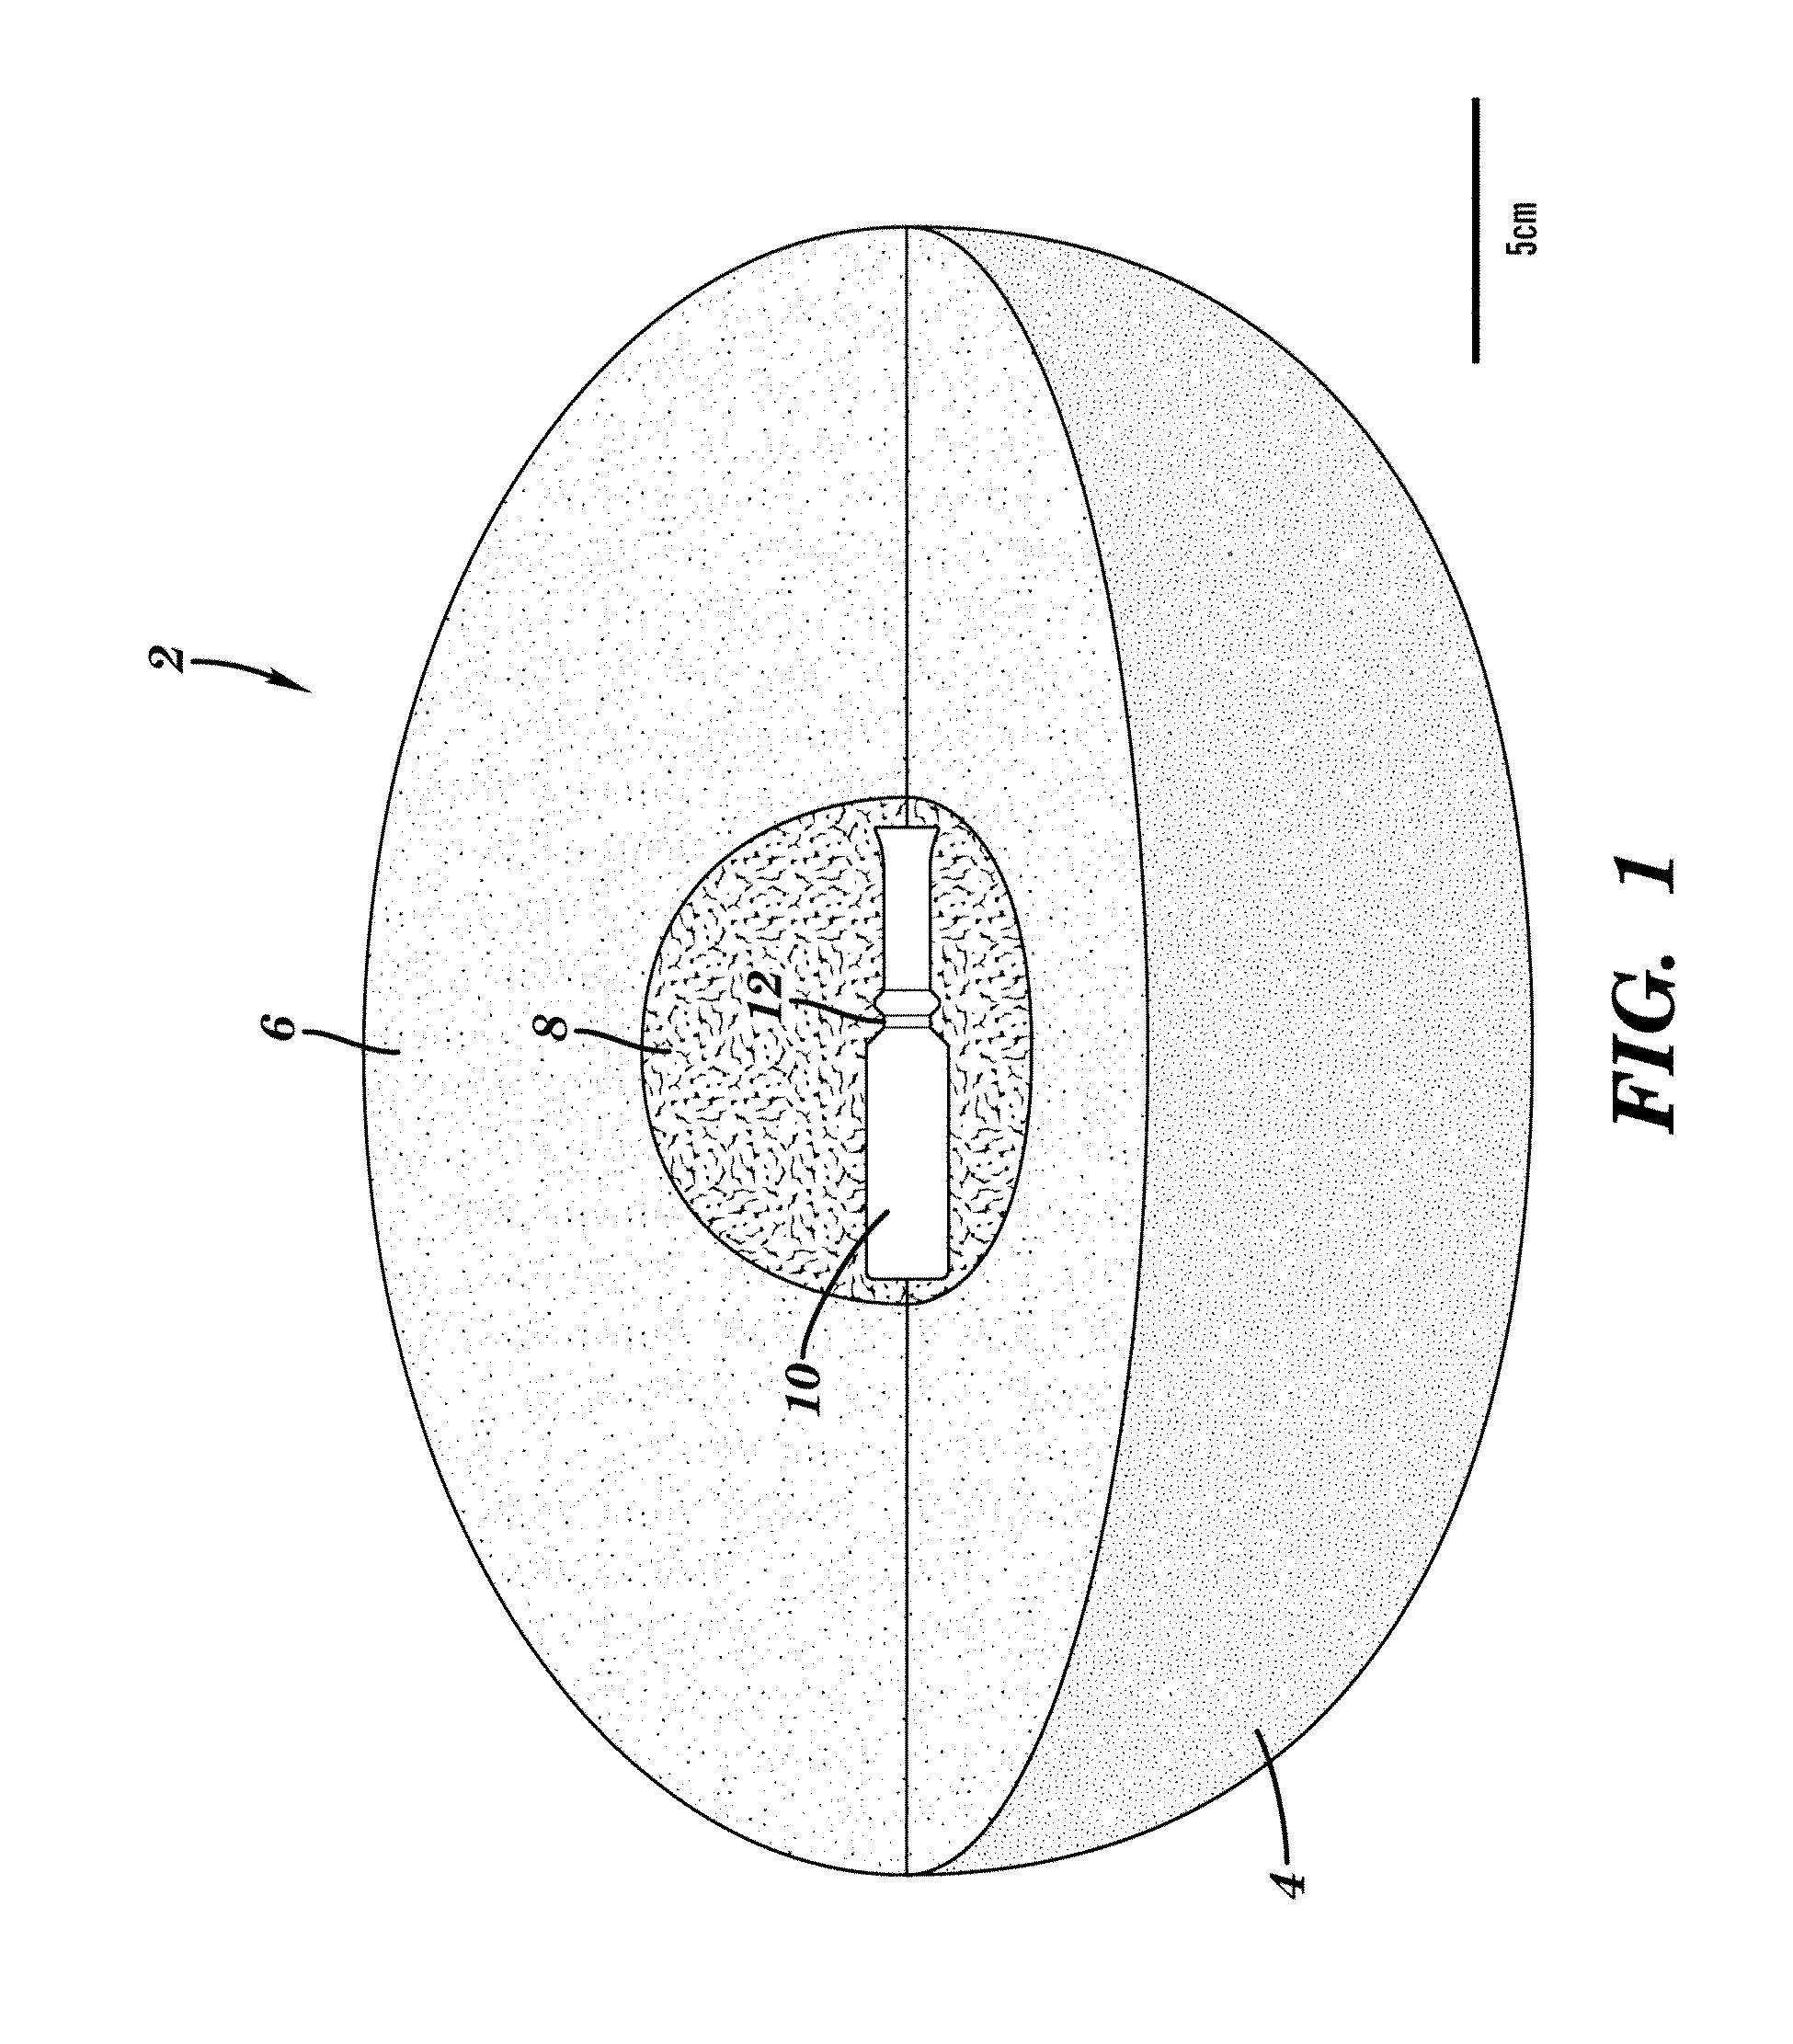 Device and method for reducing tension and stress in a subject